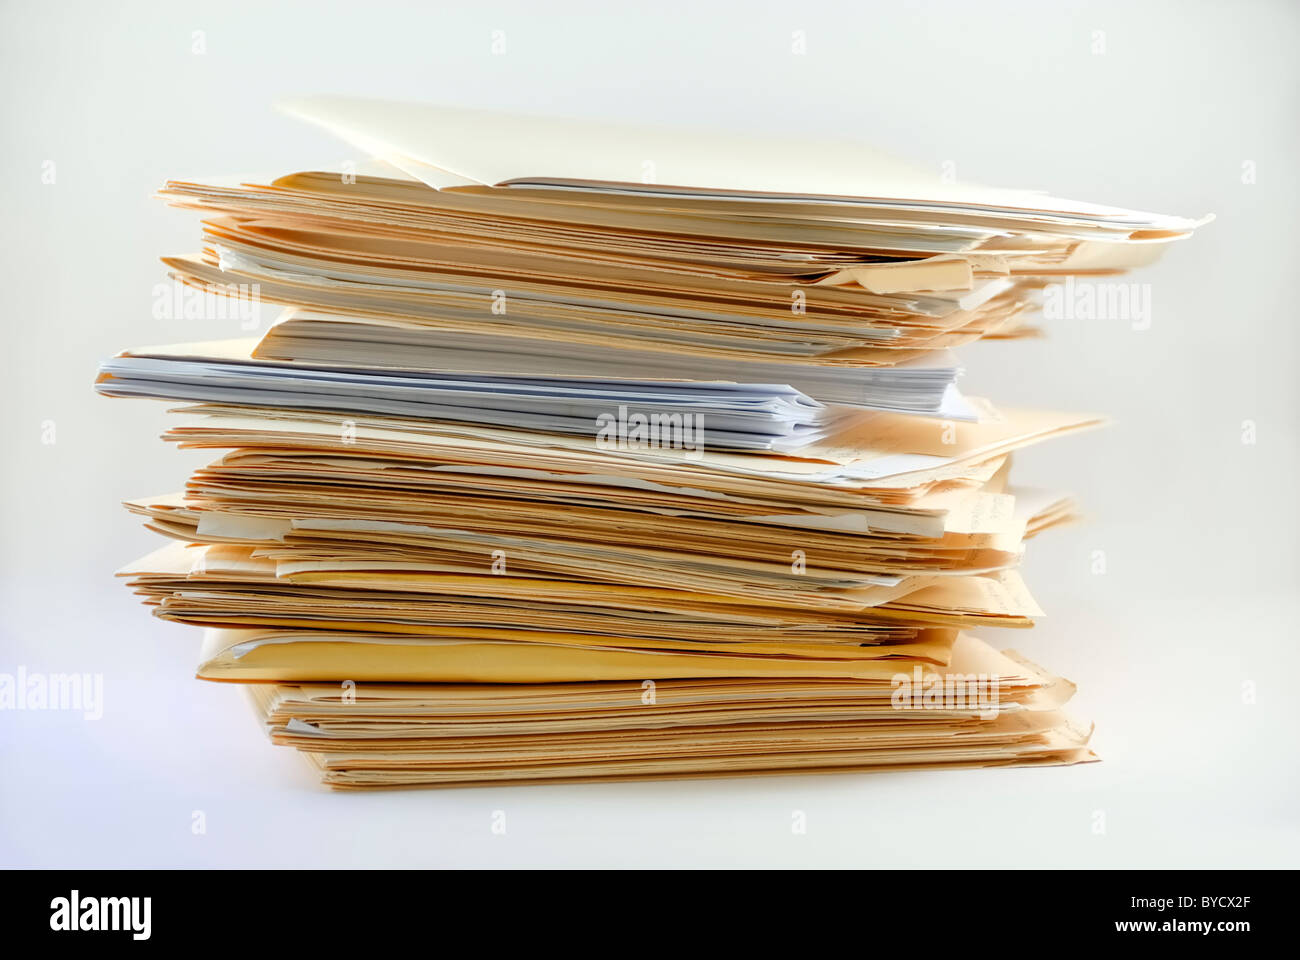 Stack of manila work file folders used in accounting or for business record keeping. They are stacked upon each other in a tall stack. Stock Photo